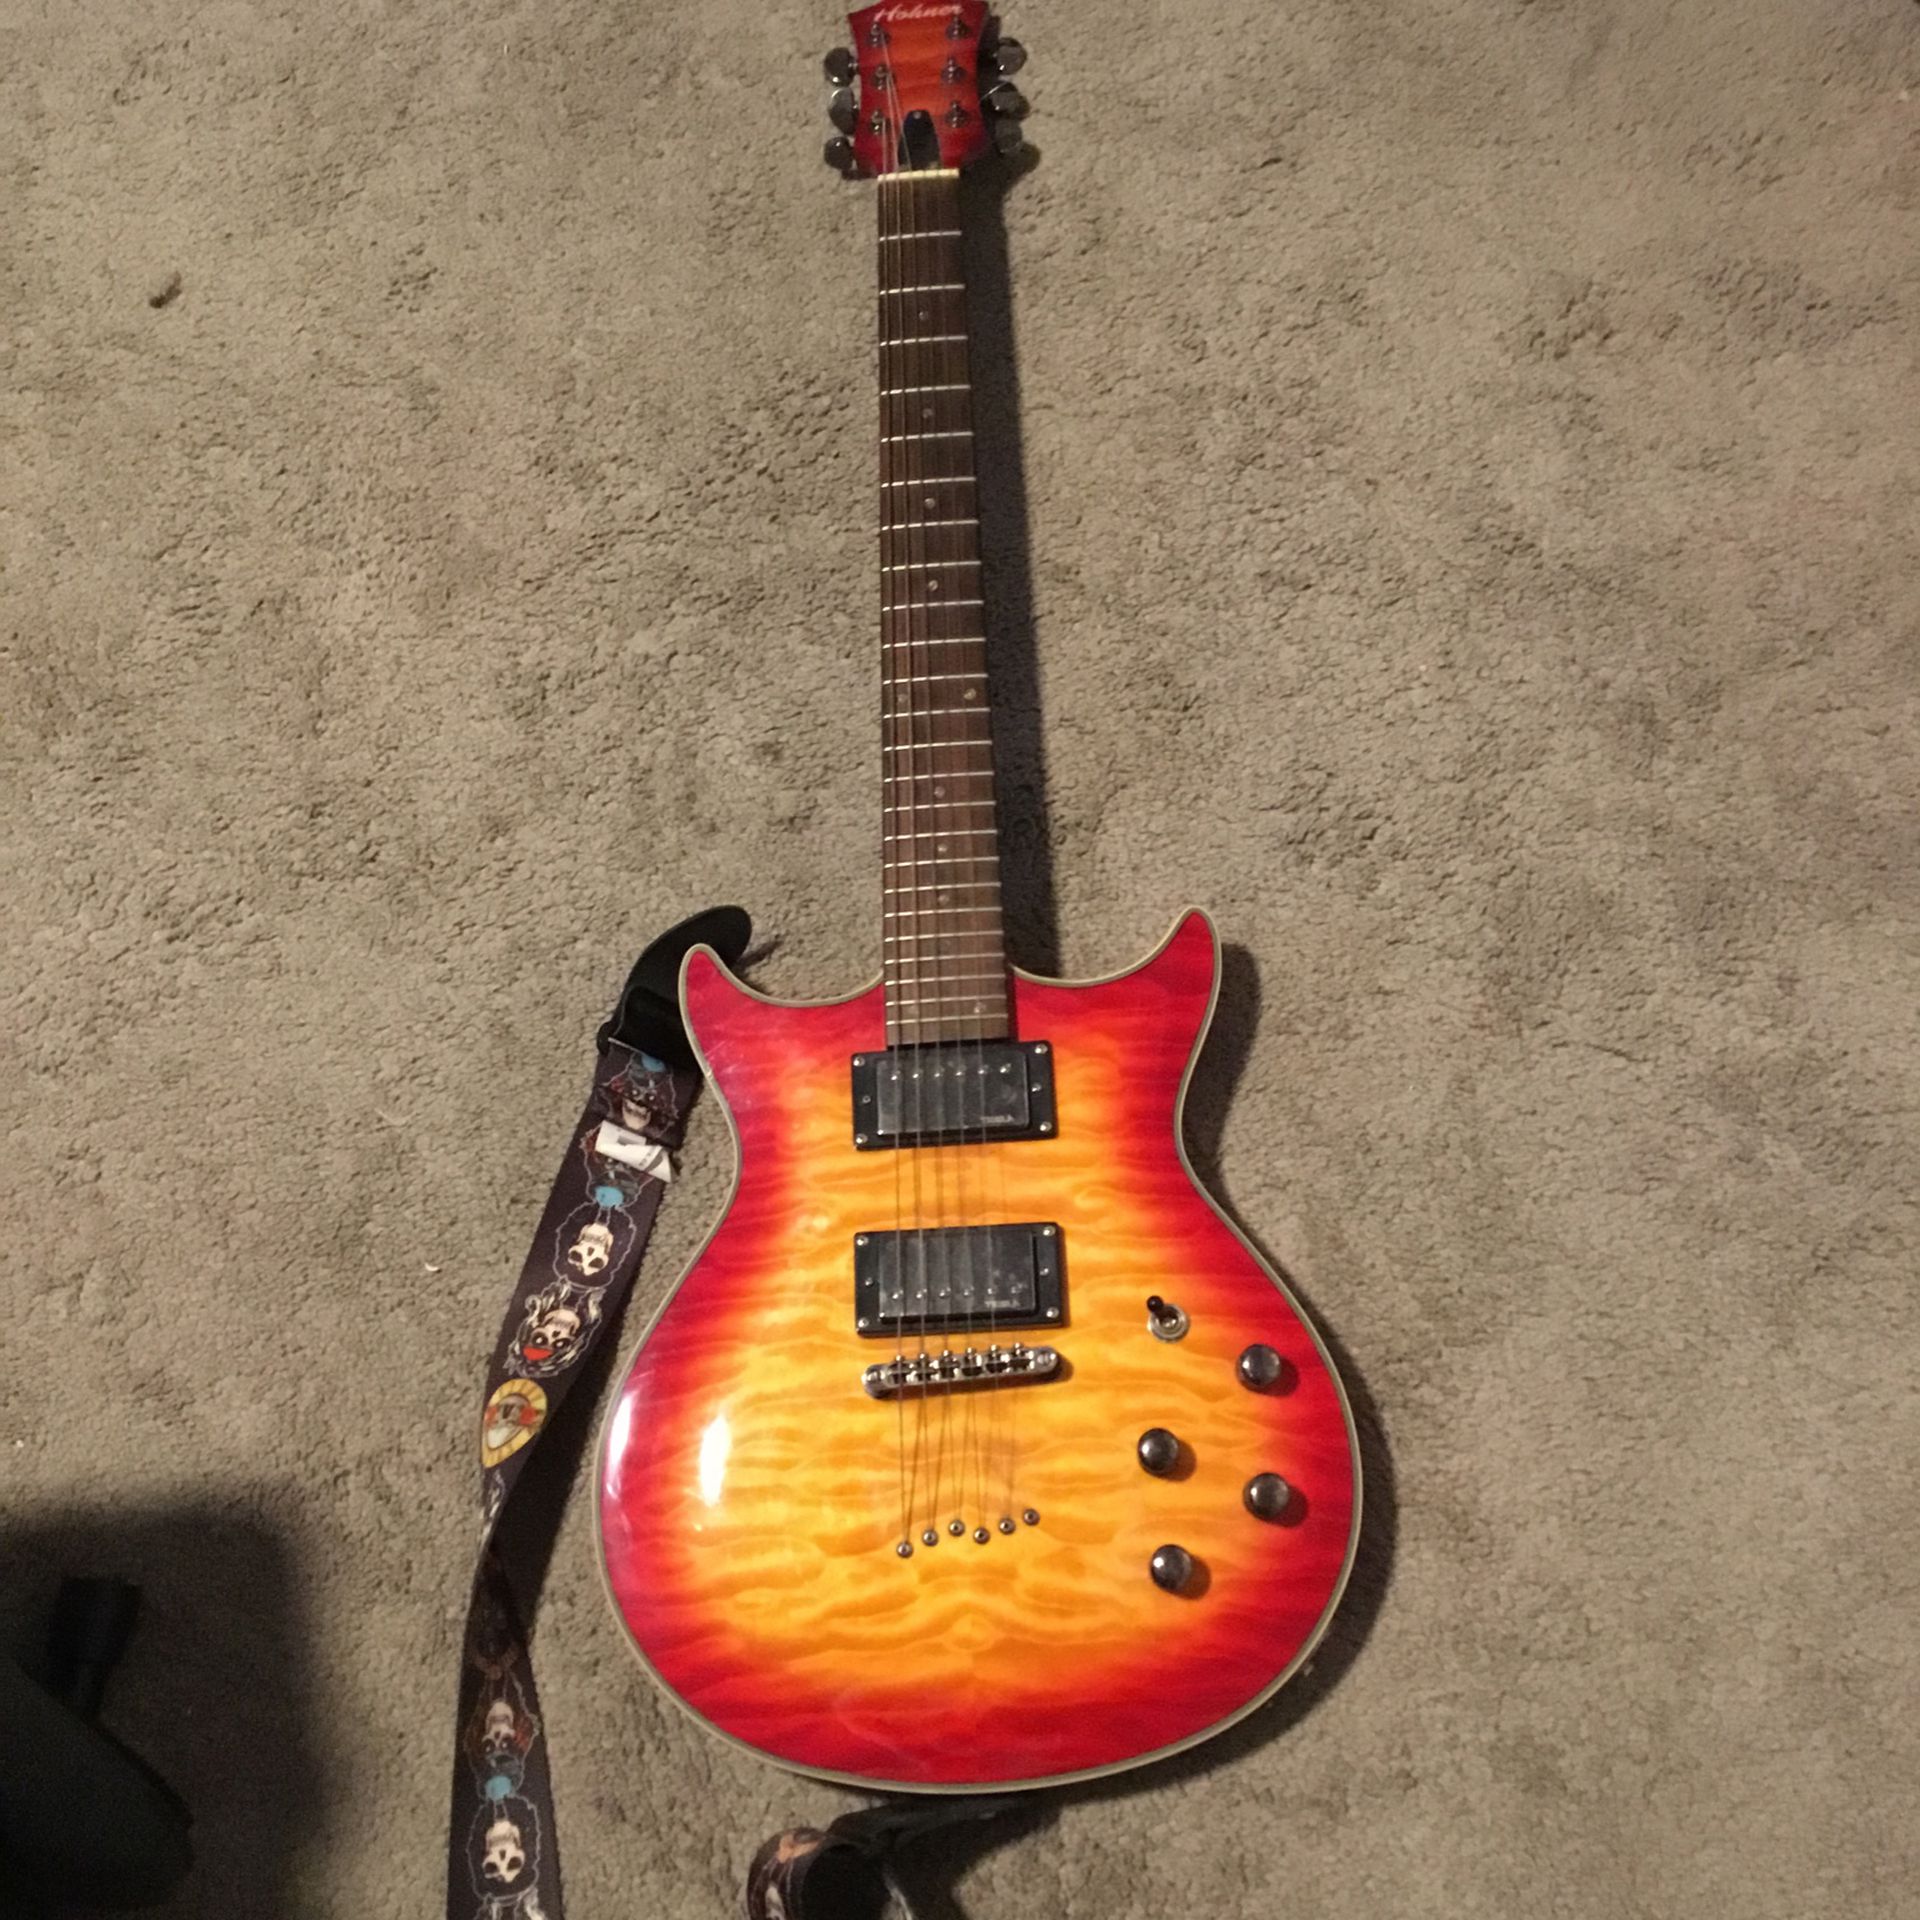 Selling a guitar for some extra cash It . It Sounds Amazing.